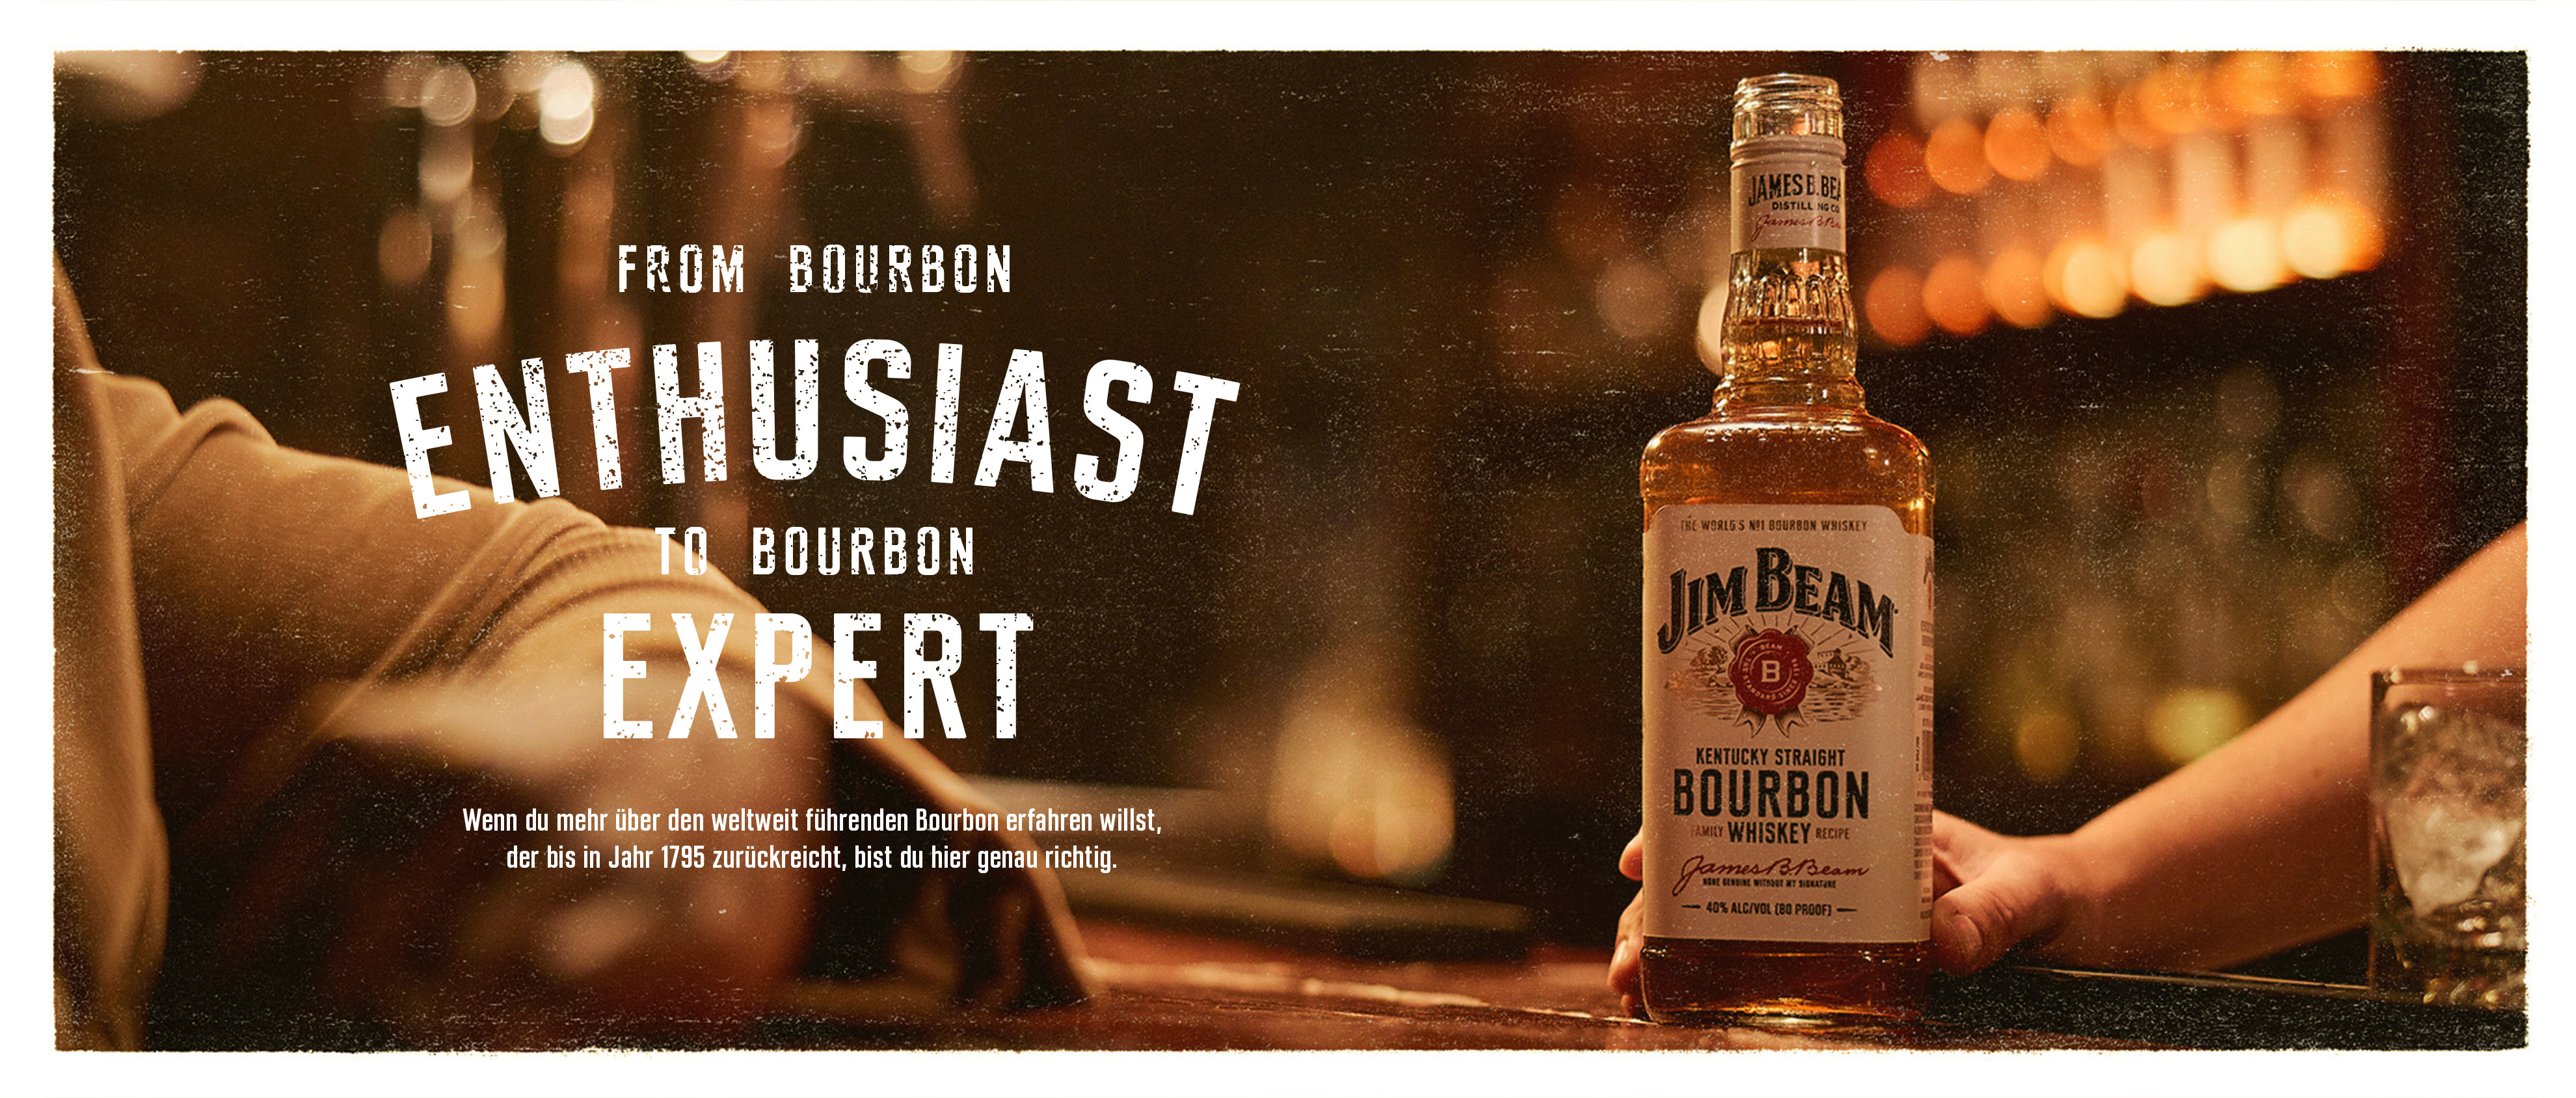 Behind the Bourbon banner Image